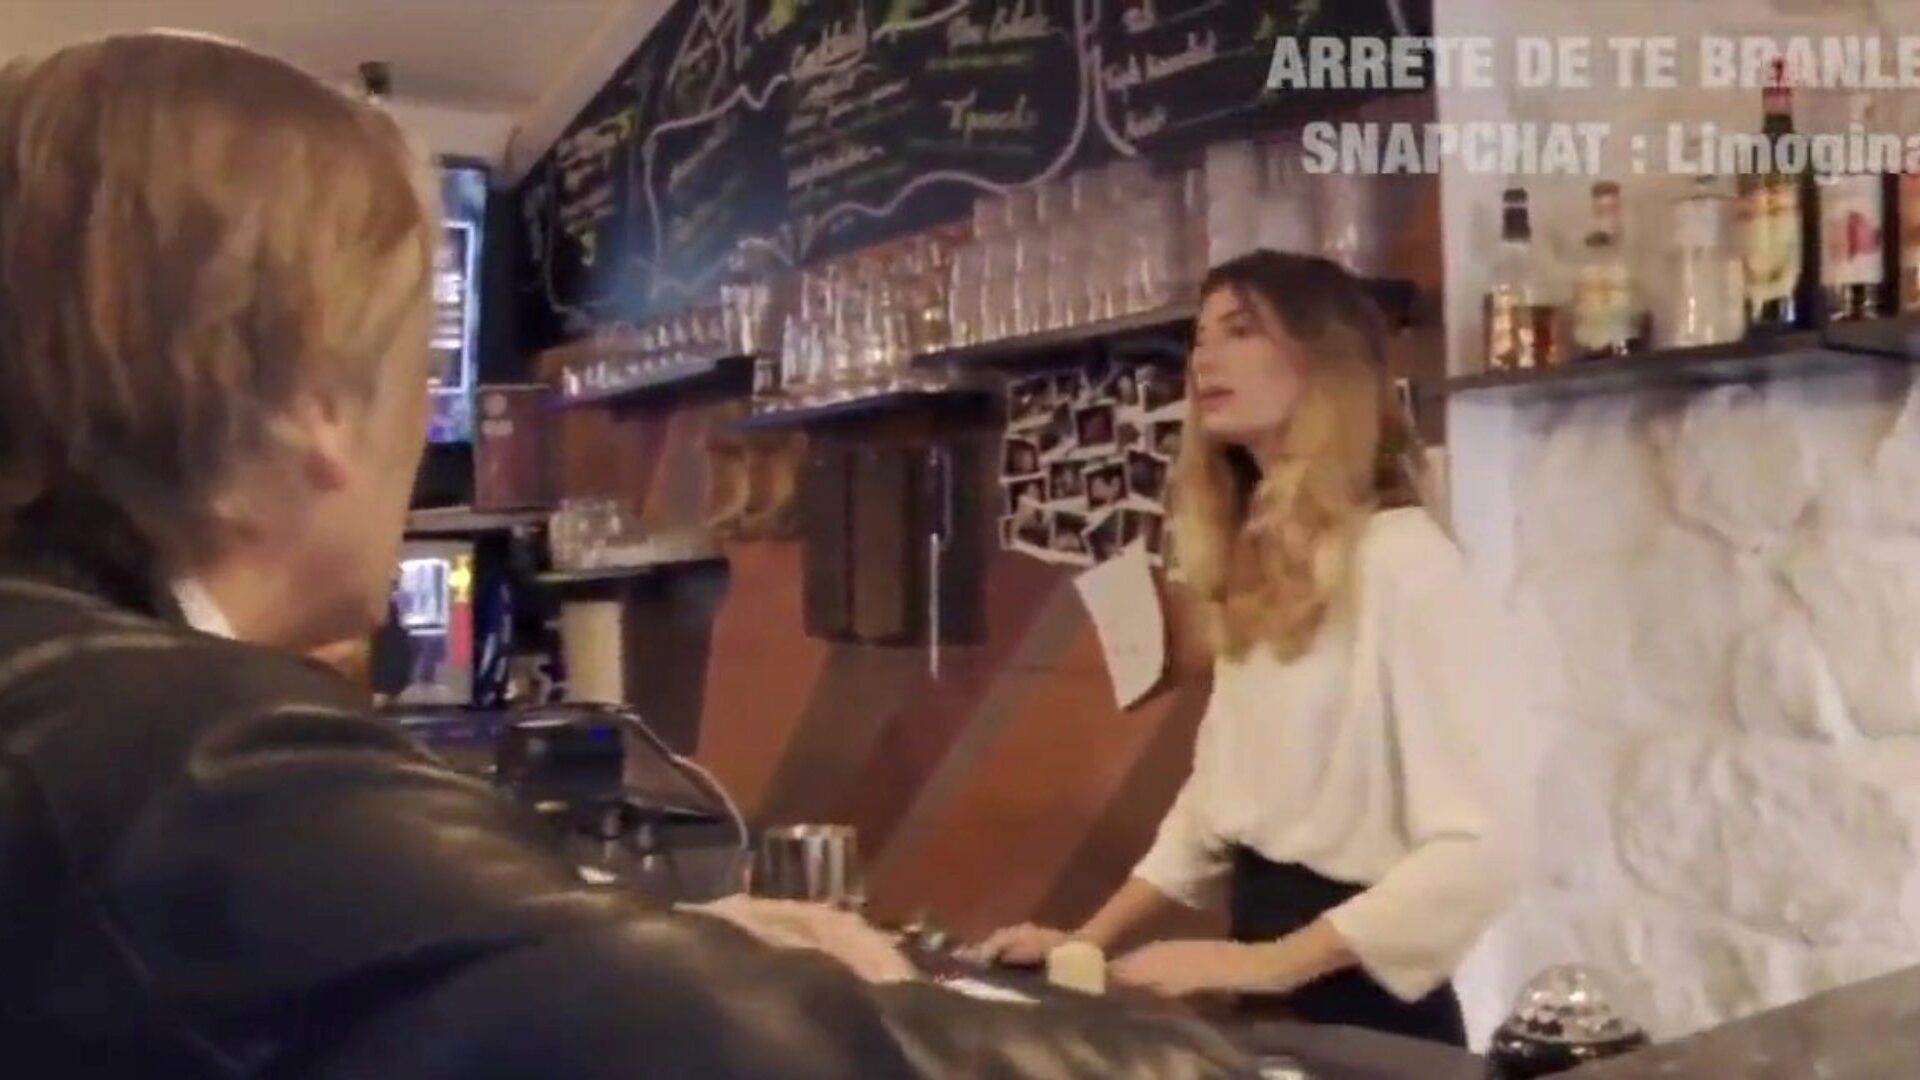 etudiante candice travaille aussi dans un bar: free porn 02 izle etudiante candice travaille aussi dans un bar movie scene on xhamster - the ultimate bevy of free french casting francais hd porno tube videos